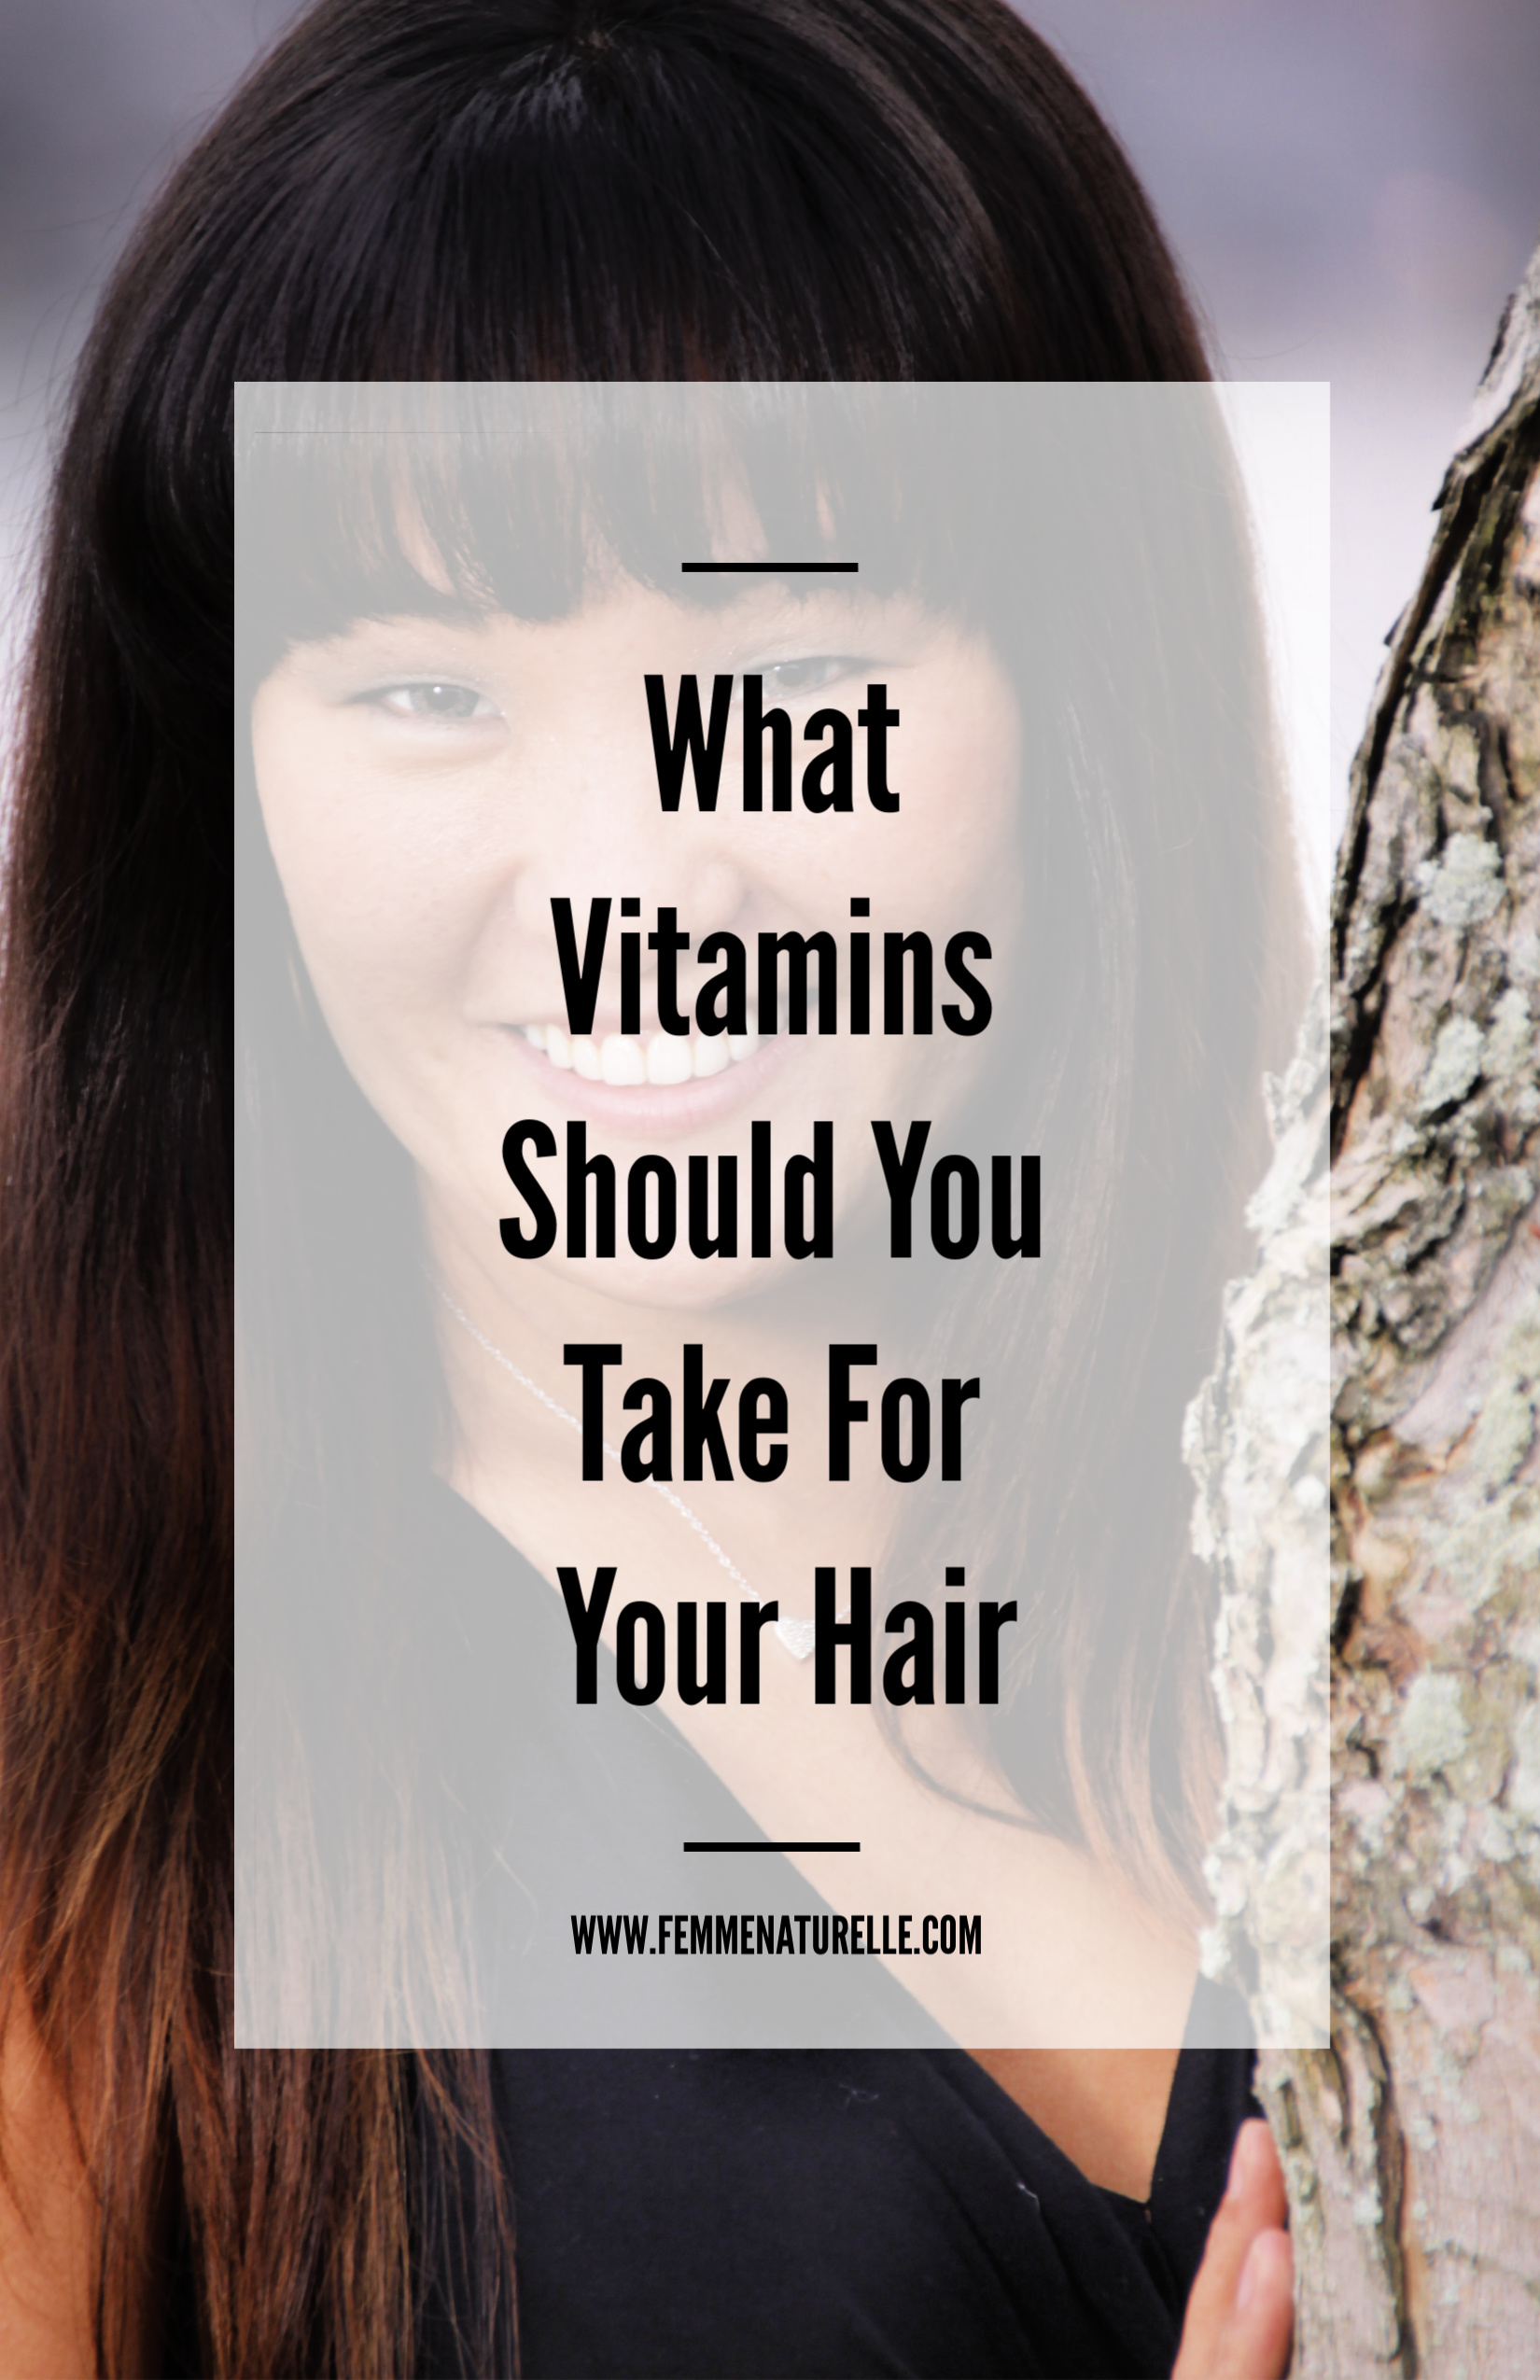 What Vitamins Should You Take For Your Hair